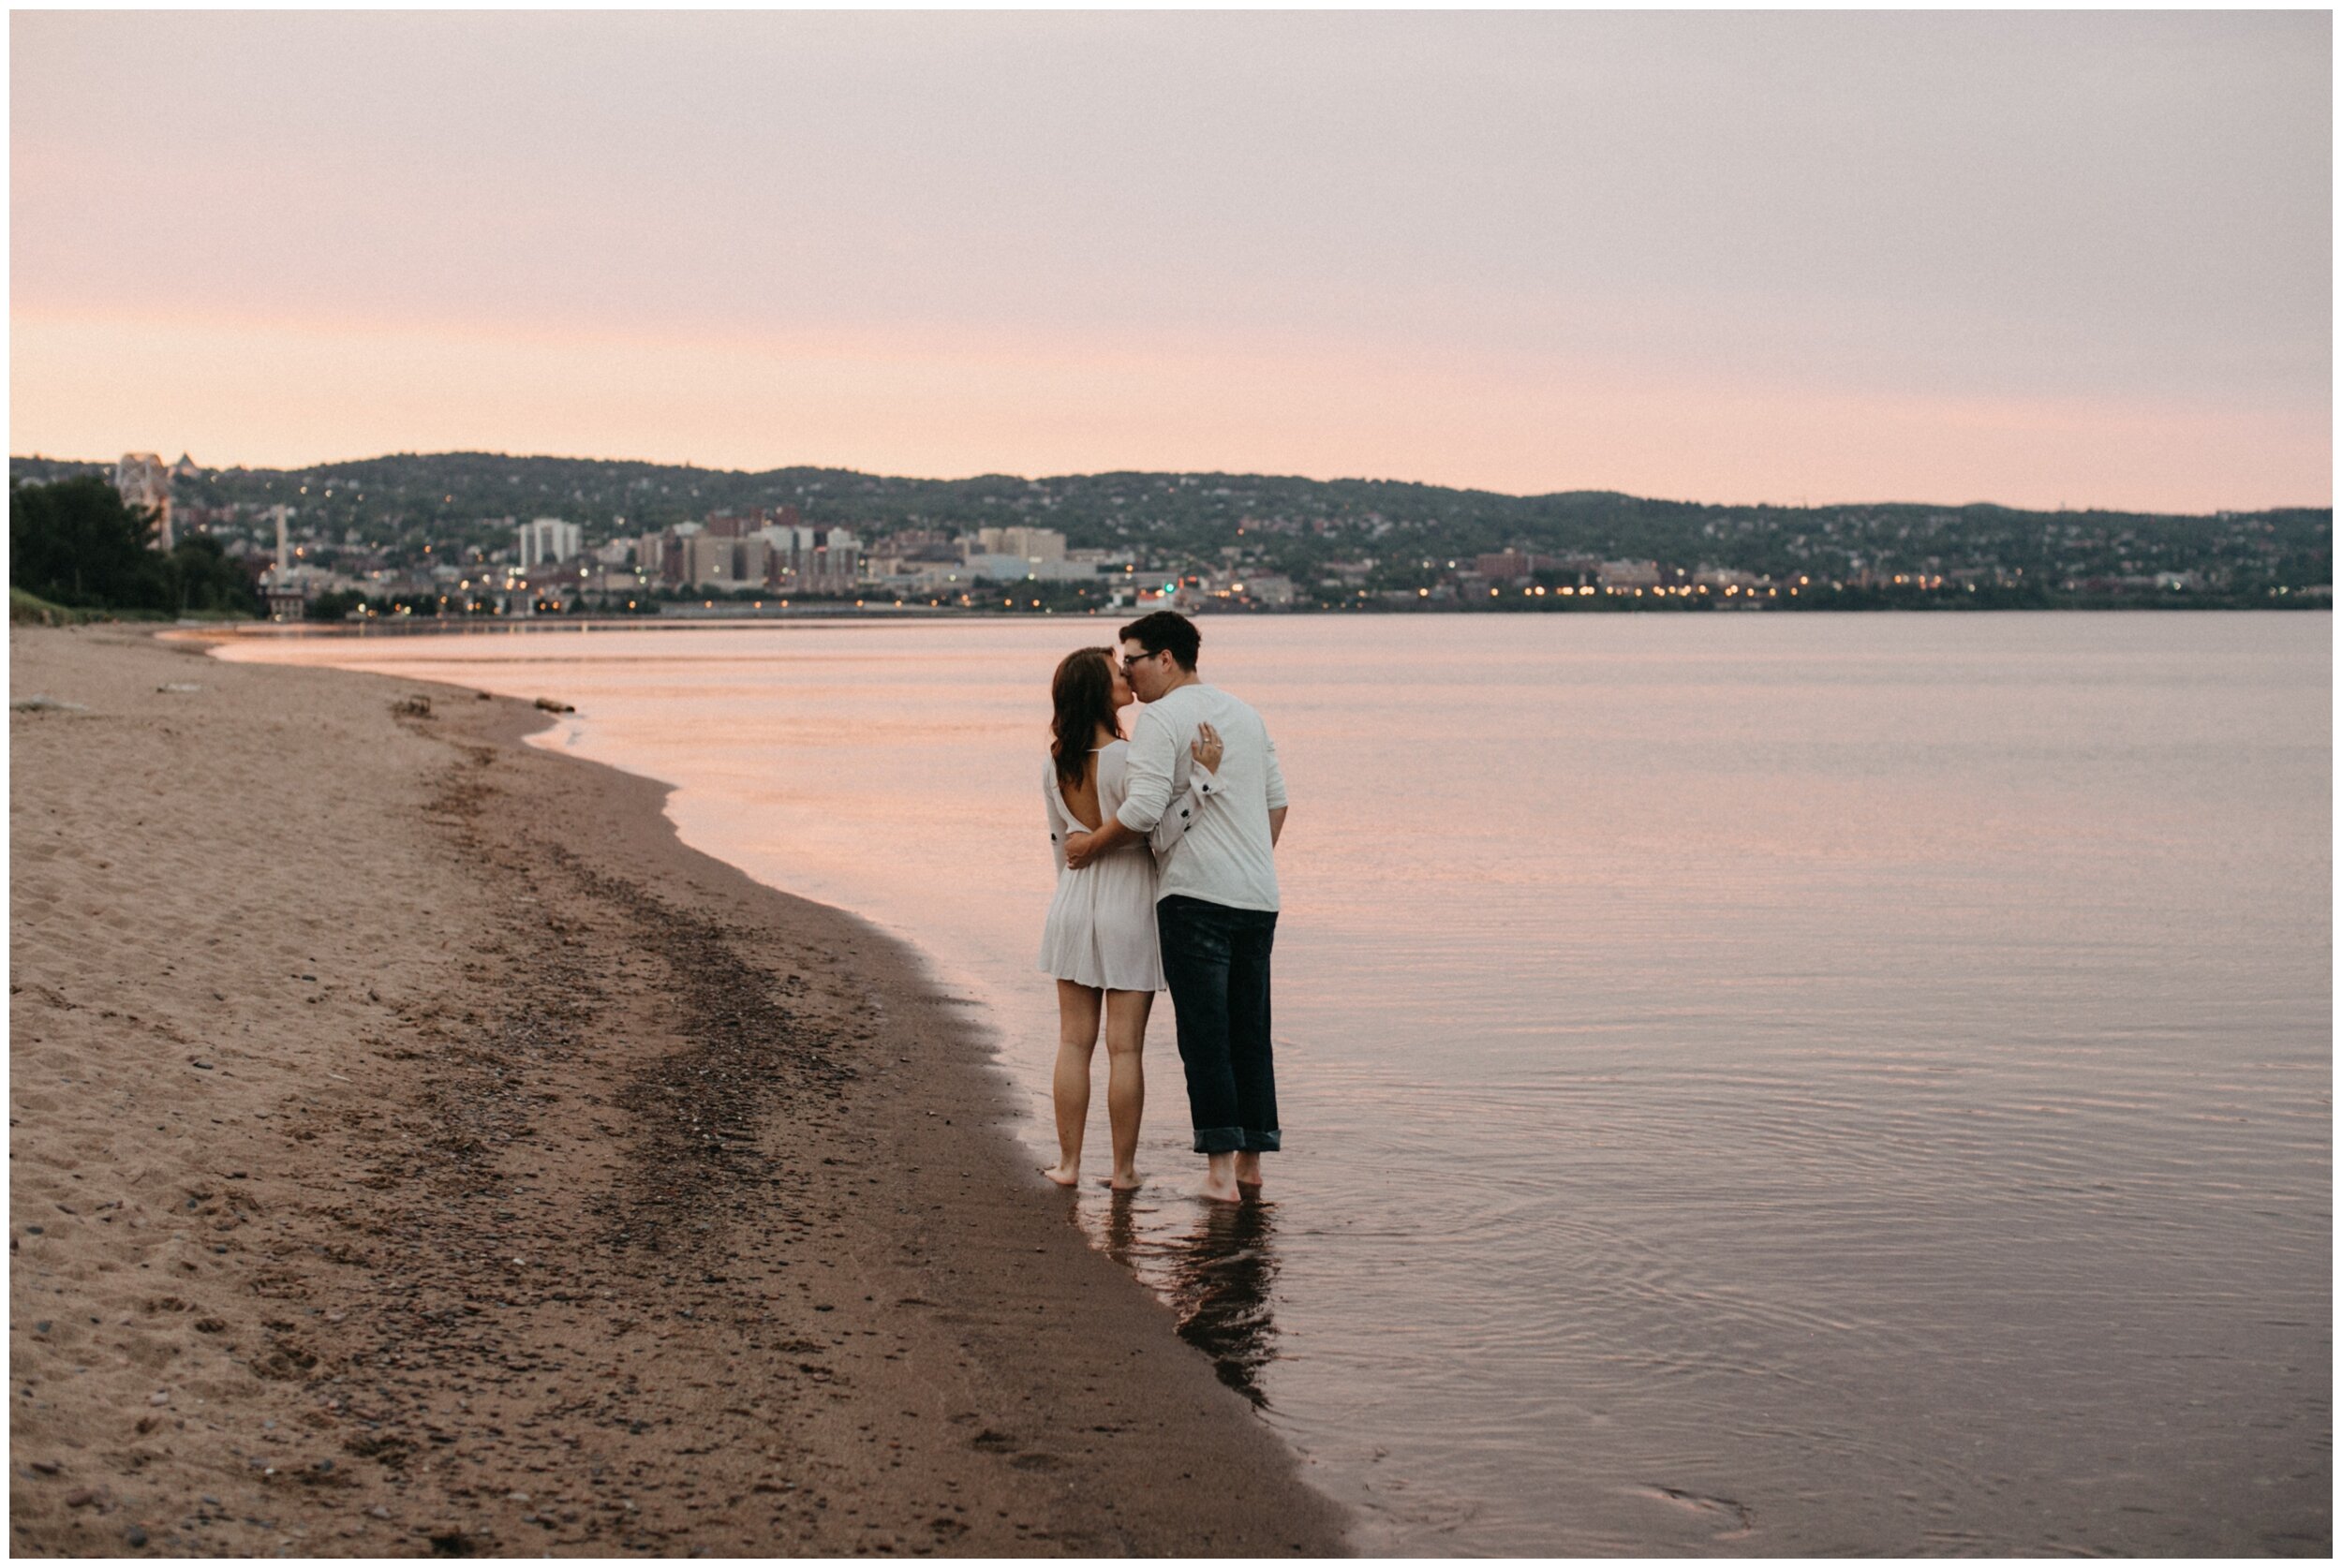 Couple kissing on beach during sunset engagement session at Park Point Beach in Duluth, MN